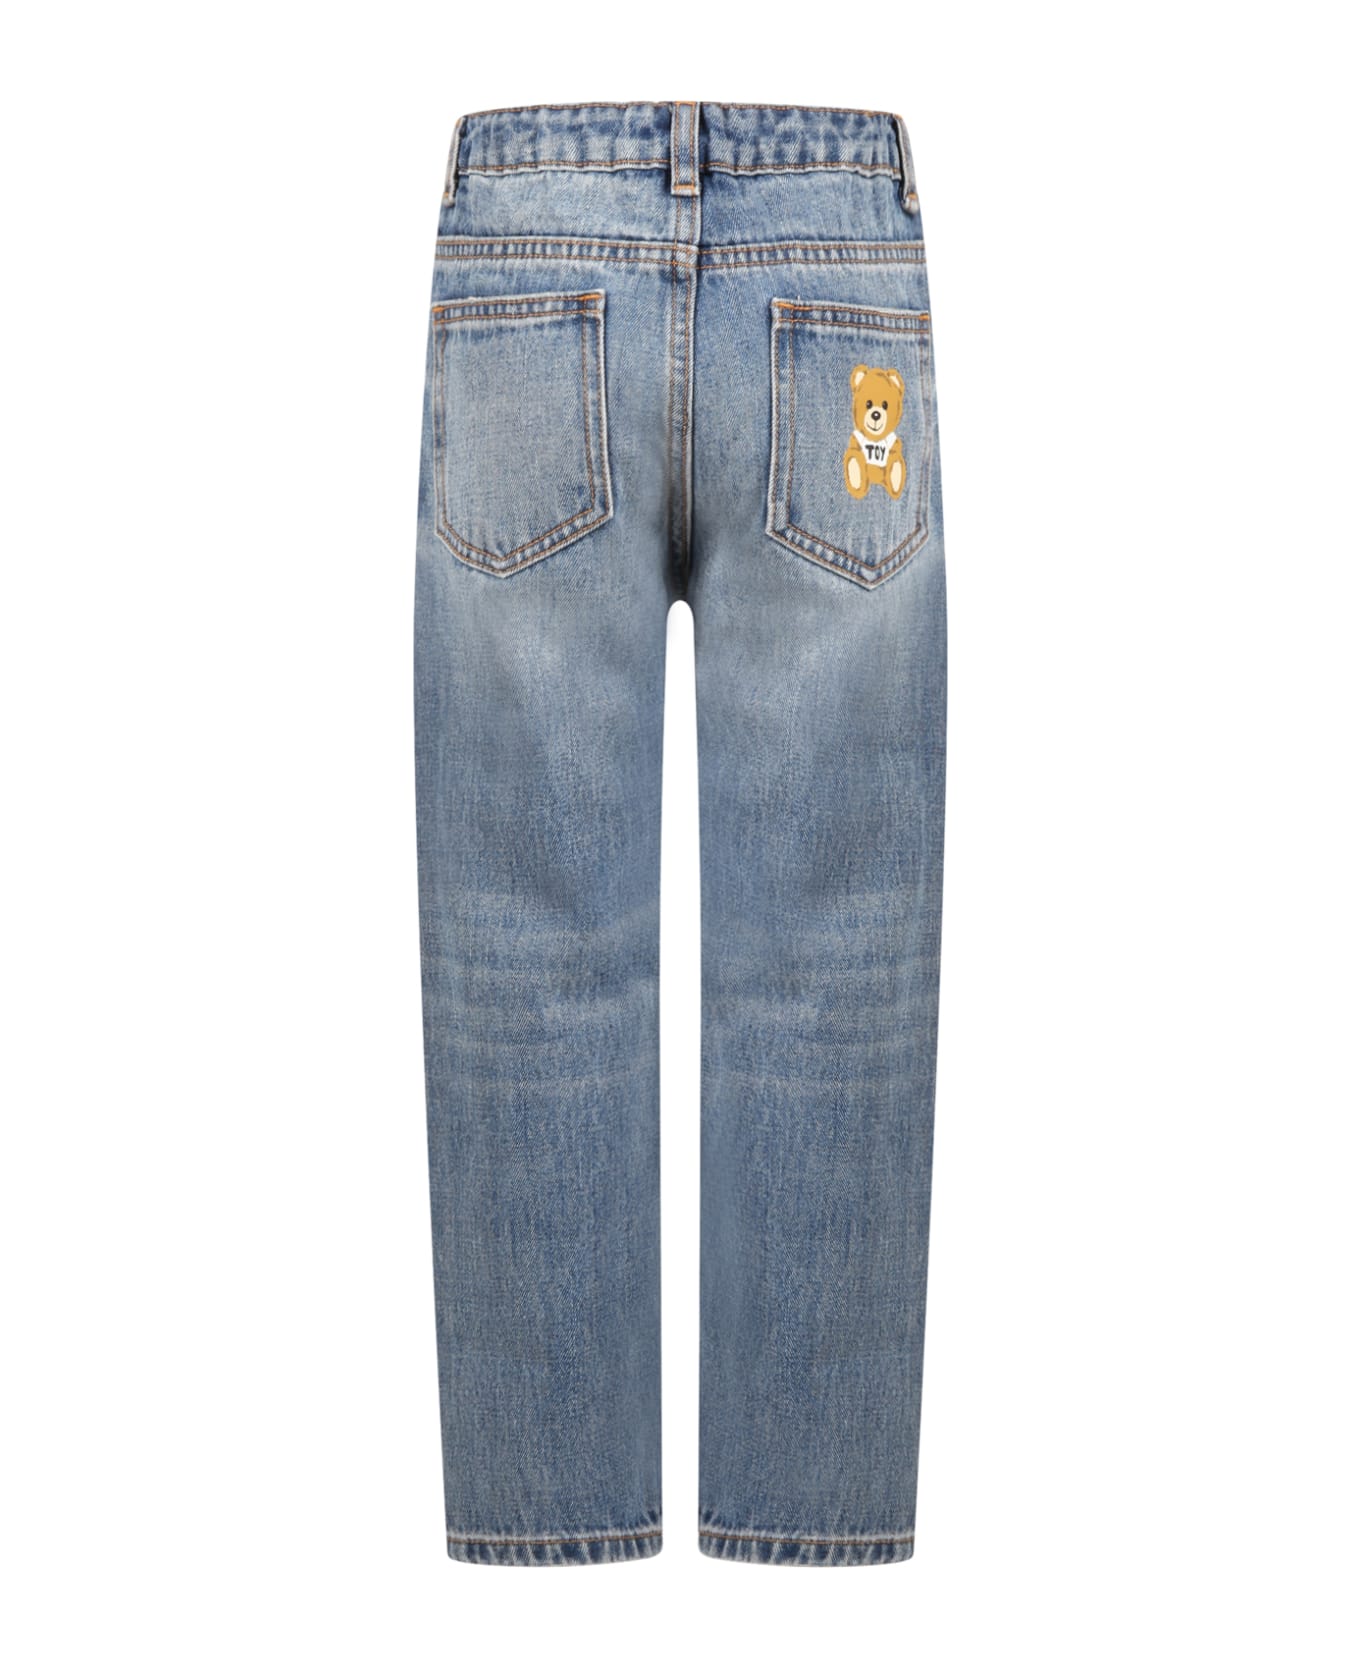 Moschino Light Blue Jeans For Baby Boy With White Logo And Teddy Bear - Denim